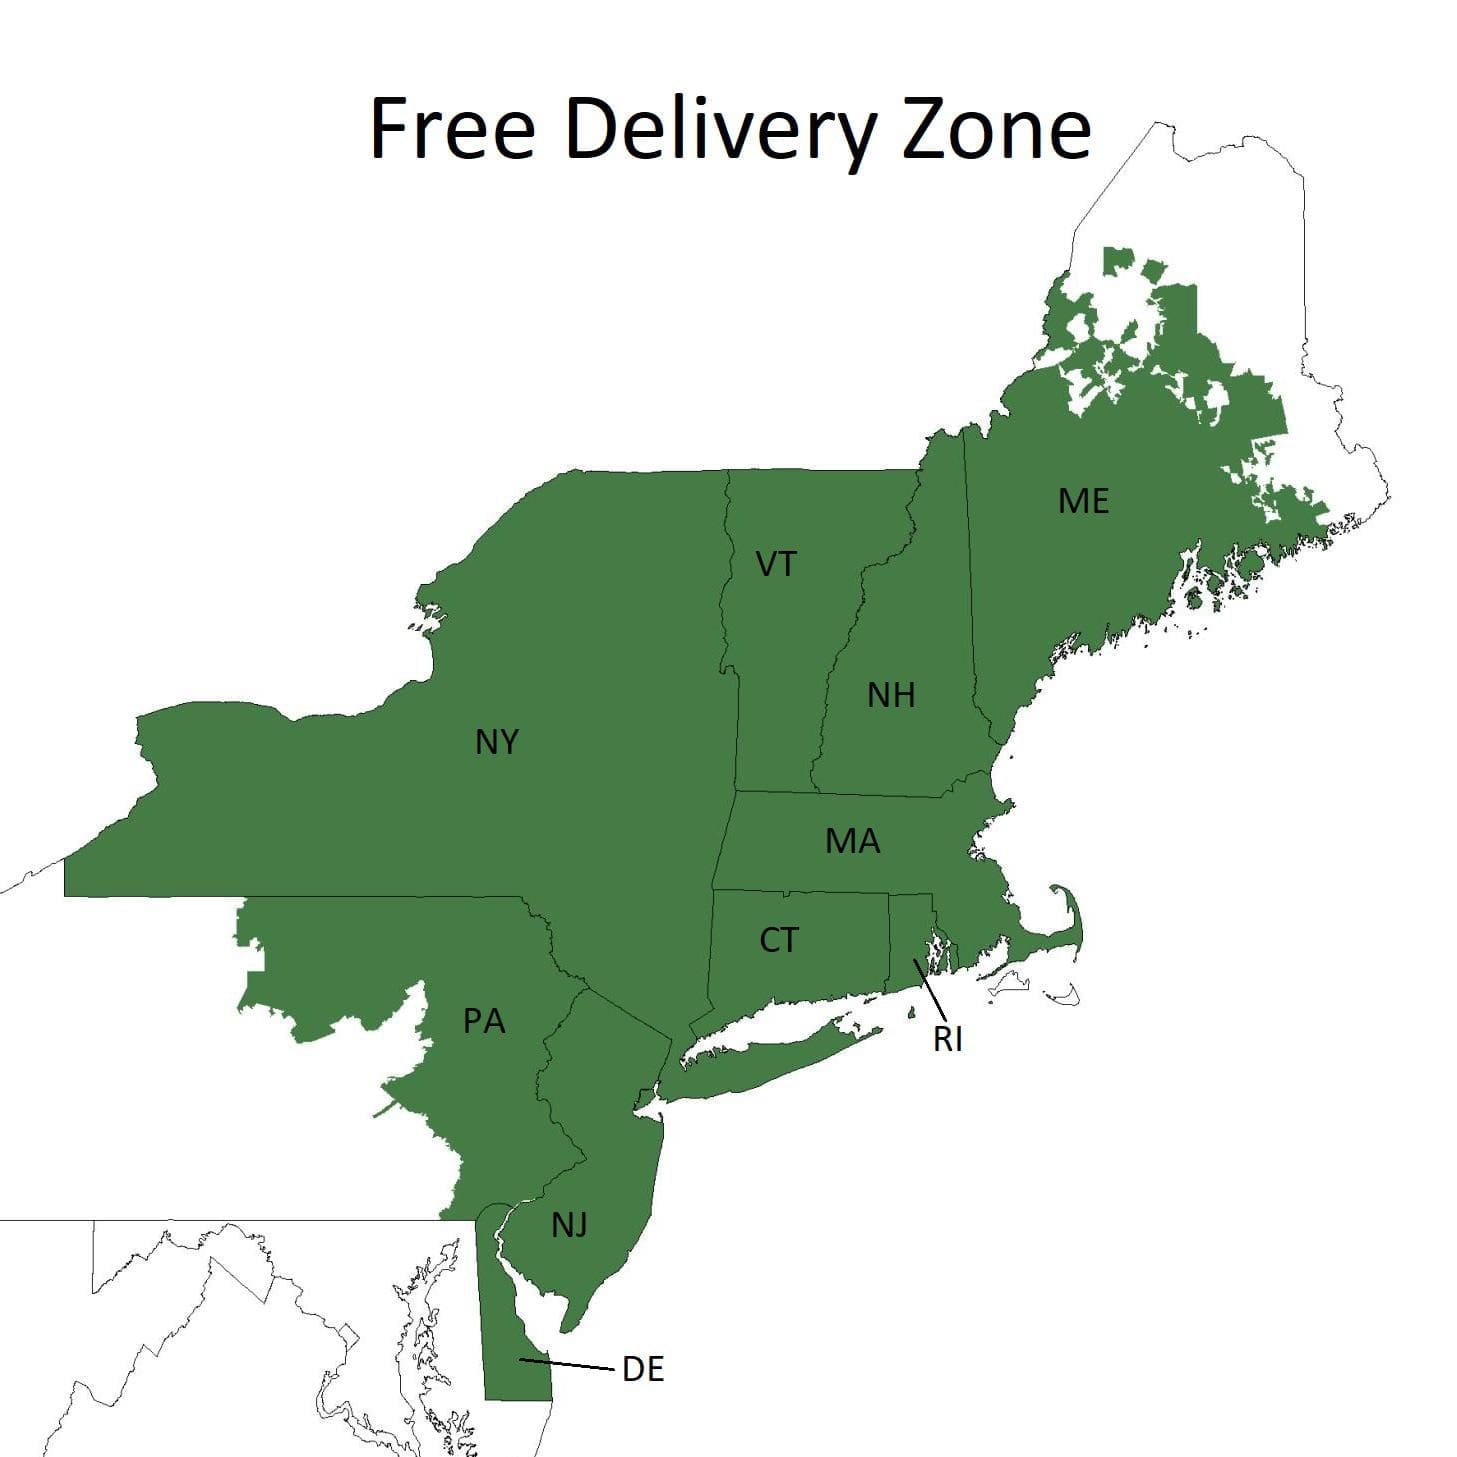 Free Delivery map for Wrong Direction Farm customers in Connecticut, Massachusetts, Vermont, New Hampshire, Rhode Island, Maine, Pennsylvania, New Jersey, Connecticut, and of course, all of New York, including New York City and Long Island.